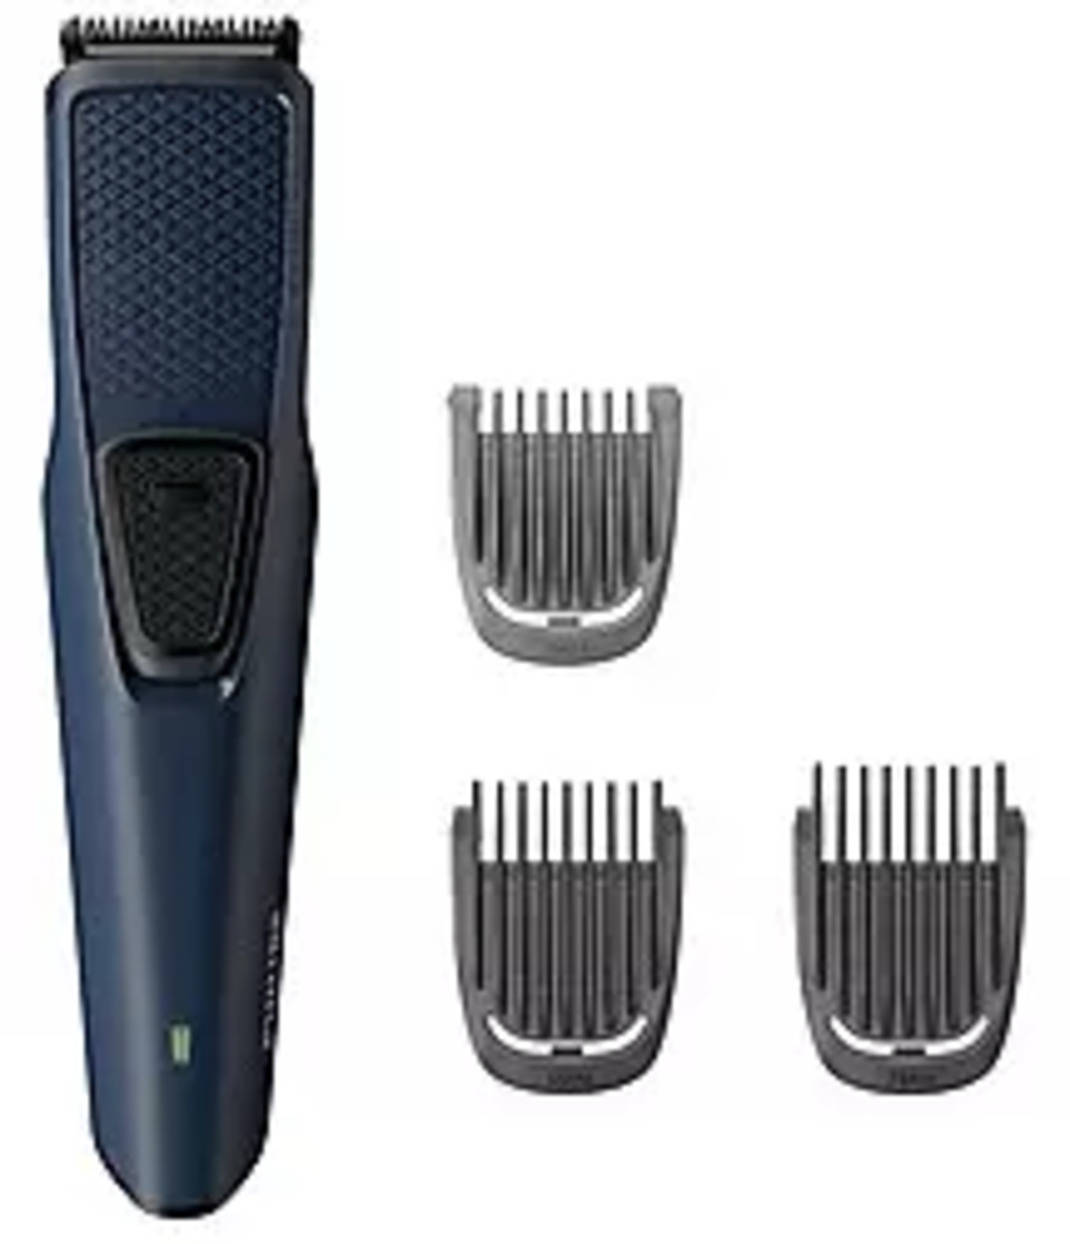 Compare Philips BT3231/15 , Beard Trimmer Trimmer for Beard & Moustache  (Black) vs Philips BT3241/15 Trimmer for Beard & Moustache (Black) vs  Philips MG3710/65, 9-in-1 (New Model) Trimmer for Head and Body 